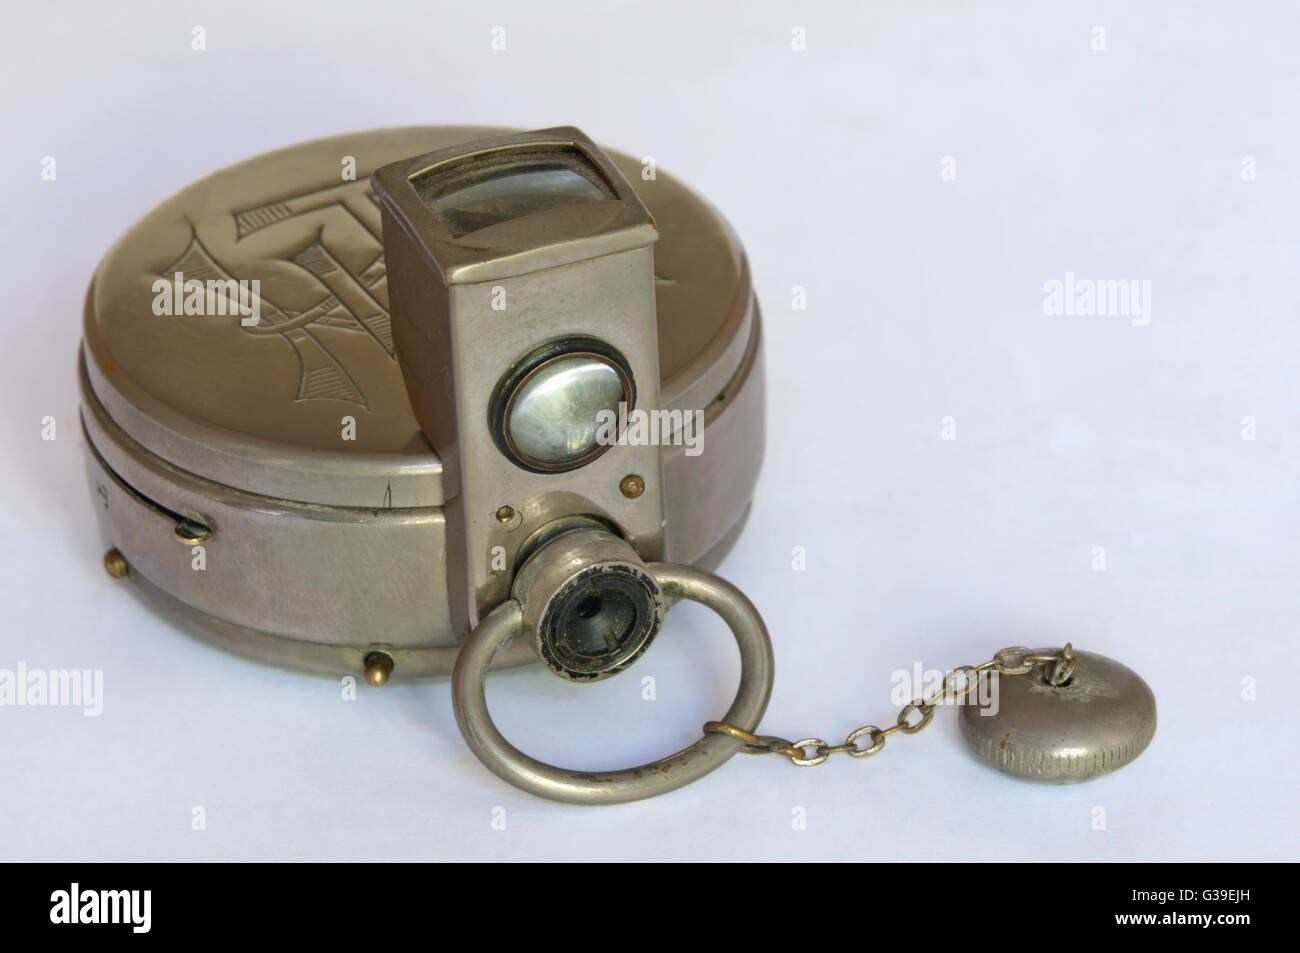 A Houghton Ticka watch camera with accessory viewfinder. Stock Photo